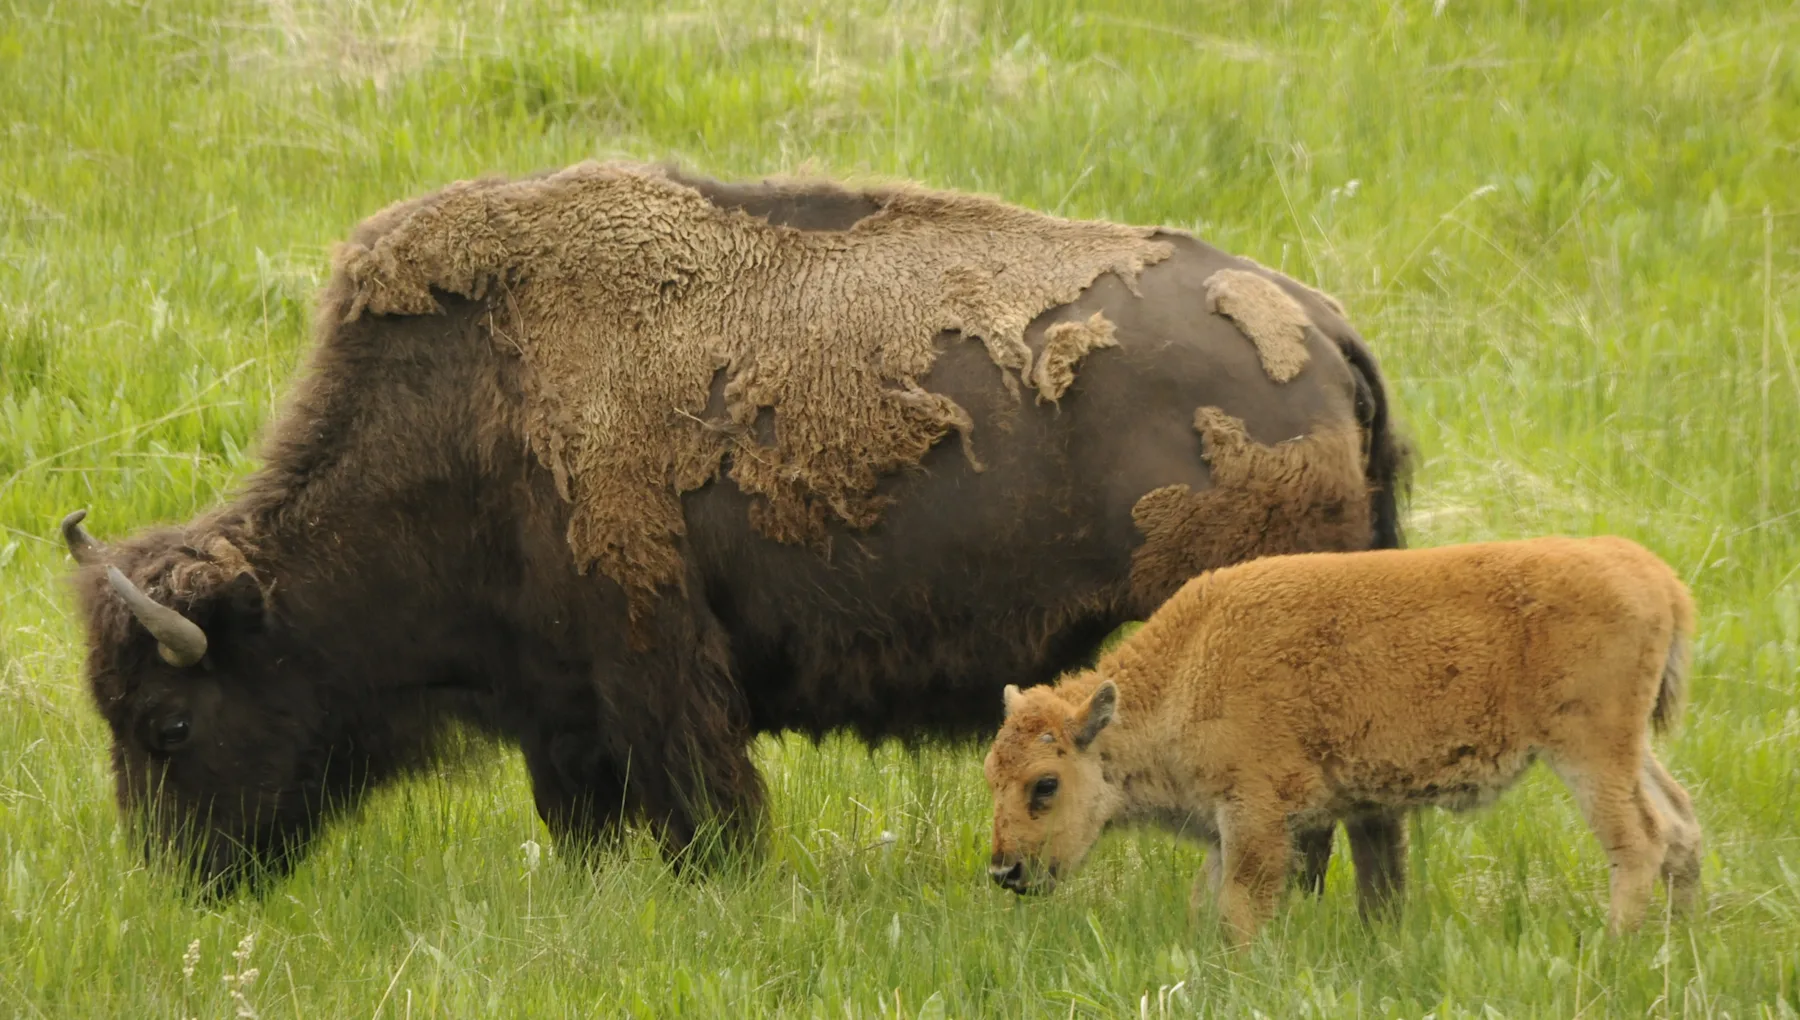 Bison and calf in grass